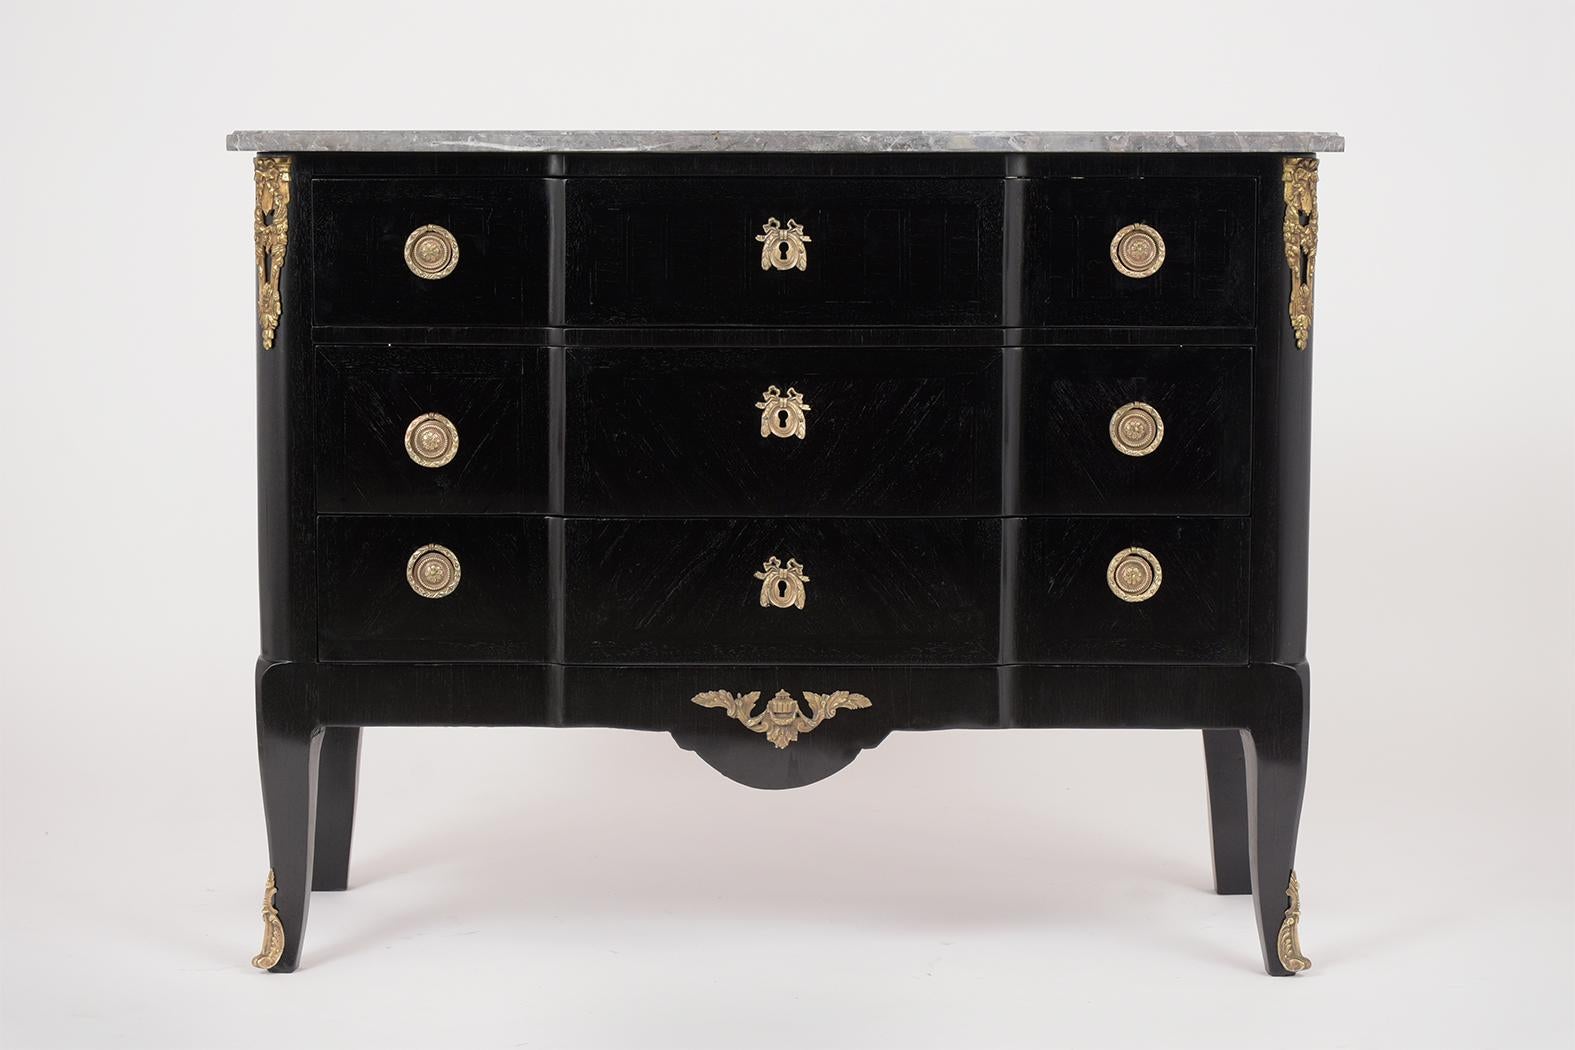 This antique French Louis XVI marble-top commode has been professionally restored, features its original dark grey color beveled marble-top, and newly ebonized lacquered finish. The commode comes with large brass accents on the corner/ front legs,